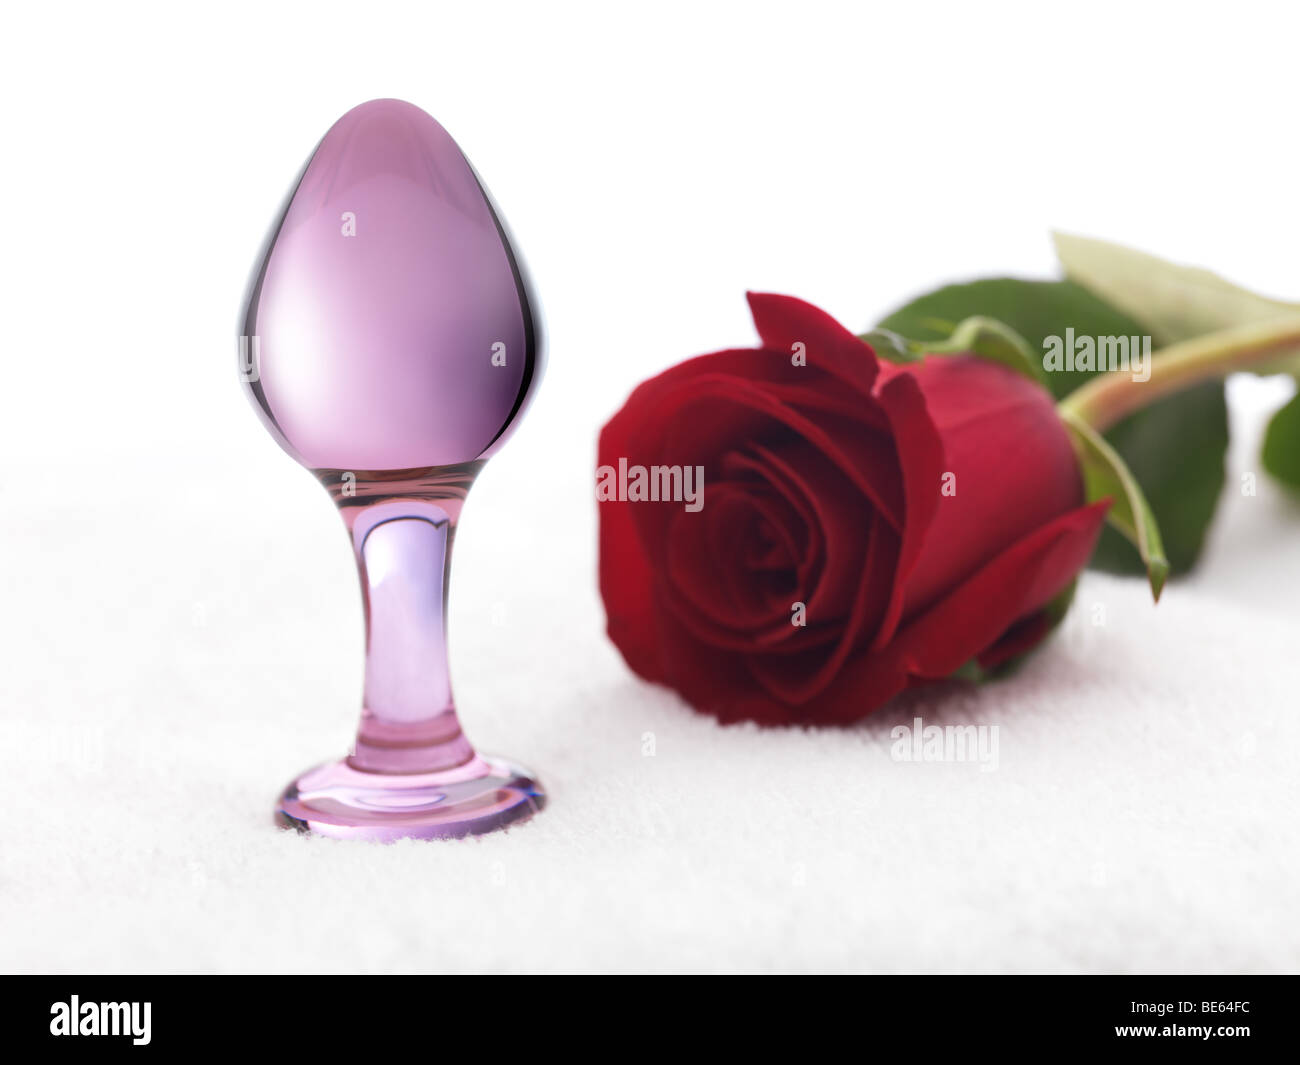 Glass dildo Sex toy and a red rose on a white towel Stock Photo